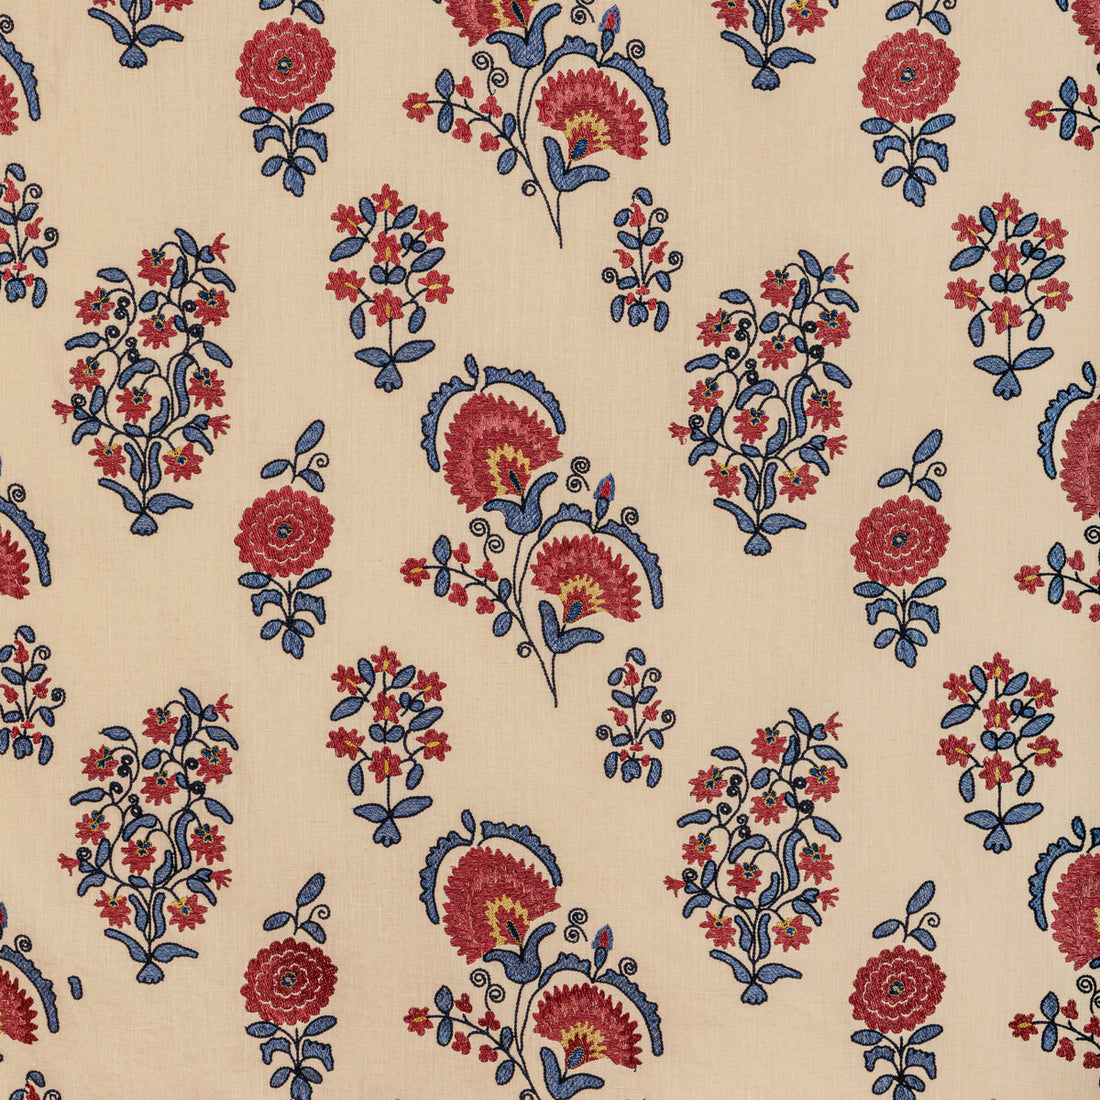 Mead Embroidery fabric in red/blue color - pattern 2022112.195.0 - by Lee Jofa in the Bunny Williams Arcadia collection